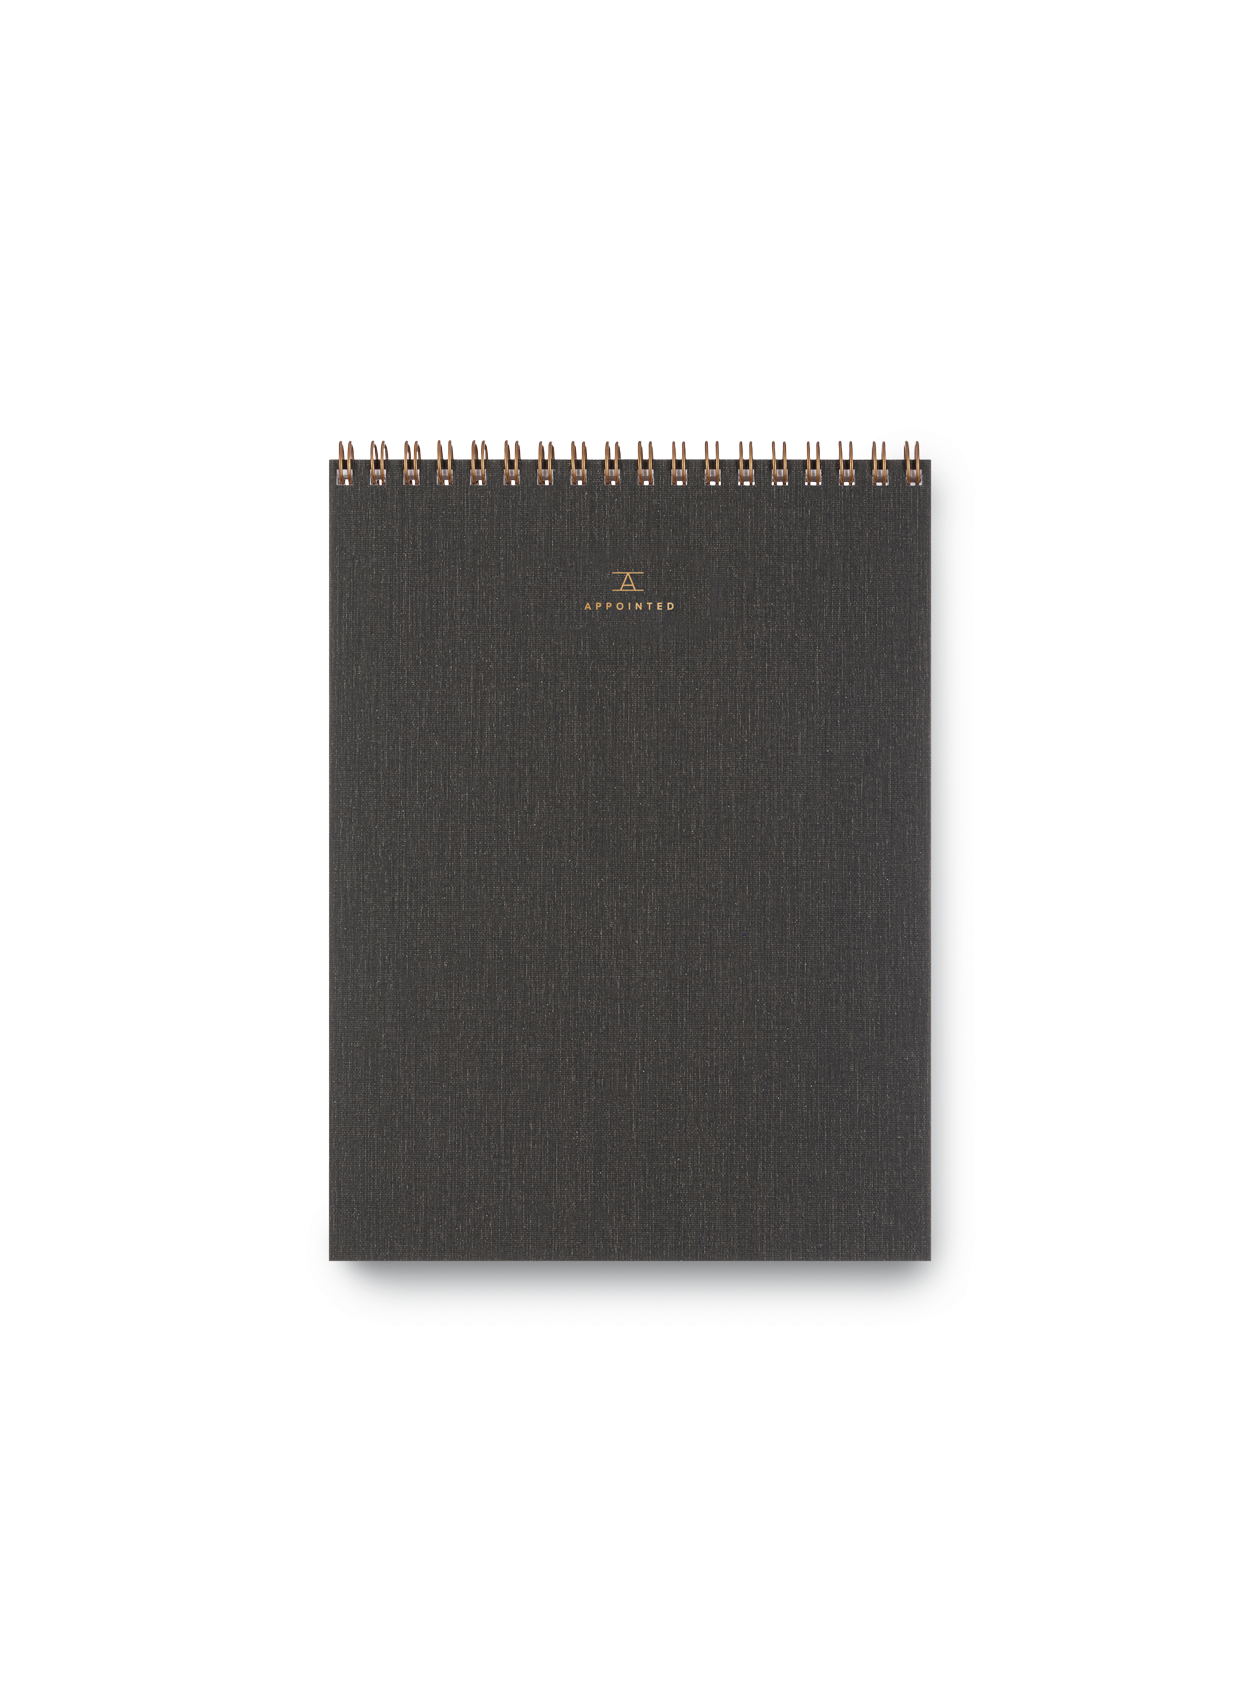 Appointed Office Notepad with gold foil details, bookcloth cover, and brass wire-o binding || Charcoal Gray